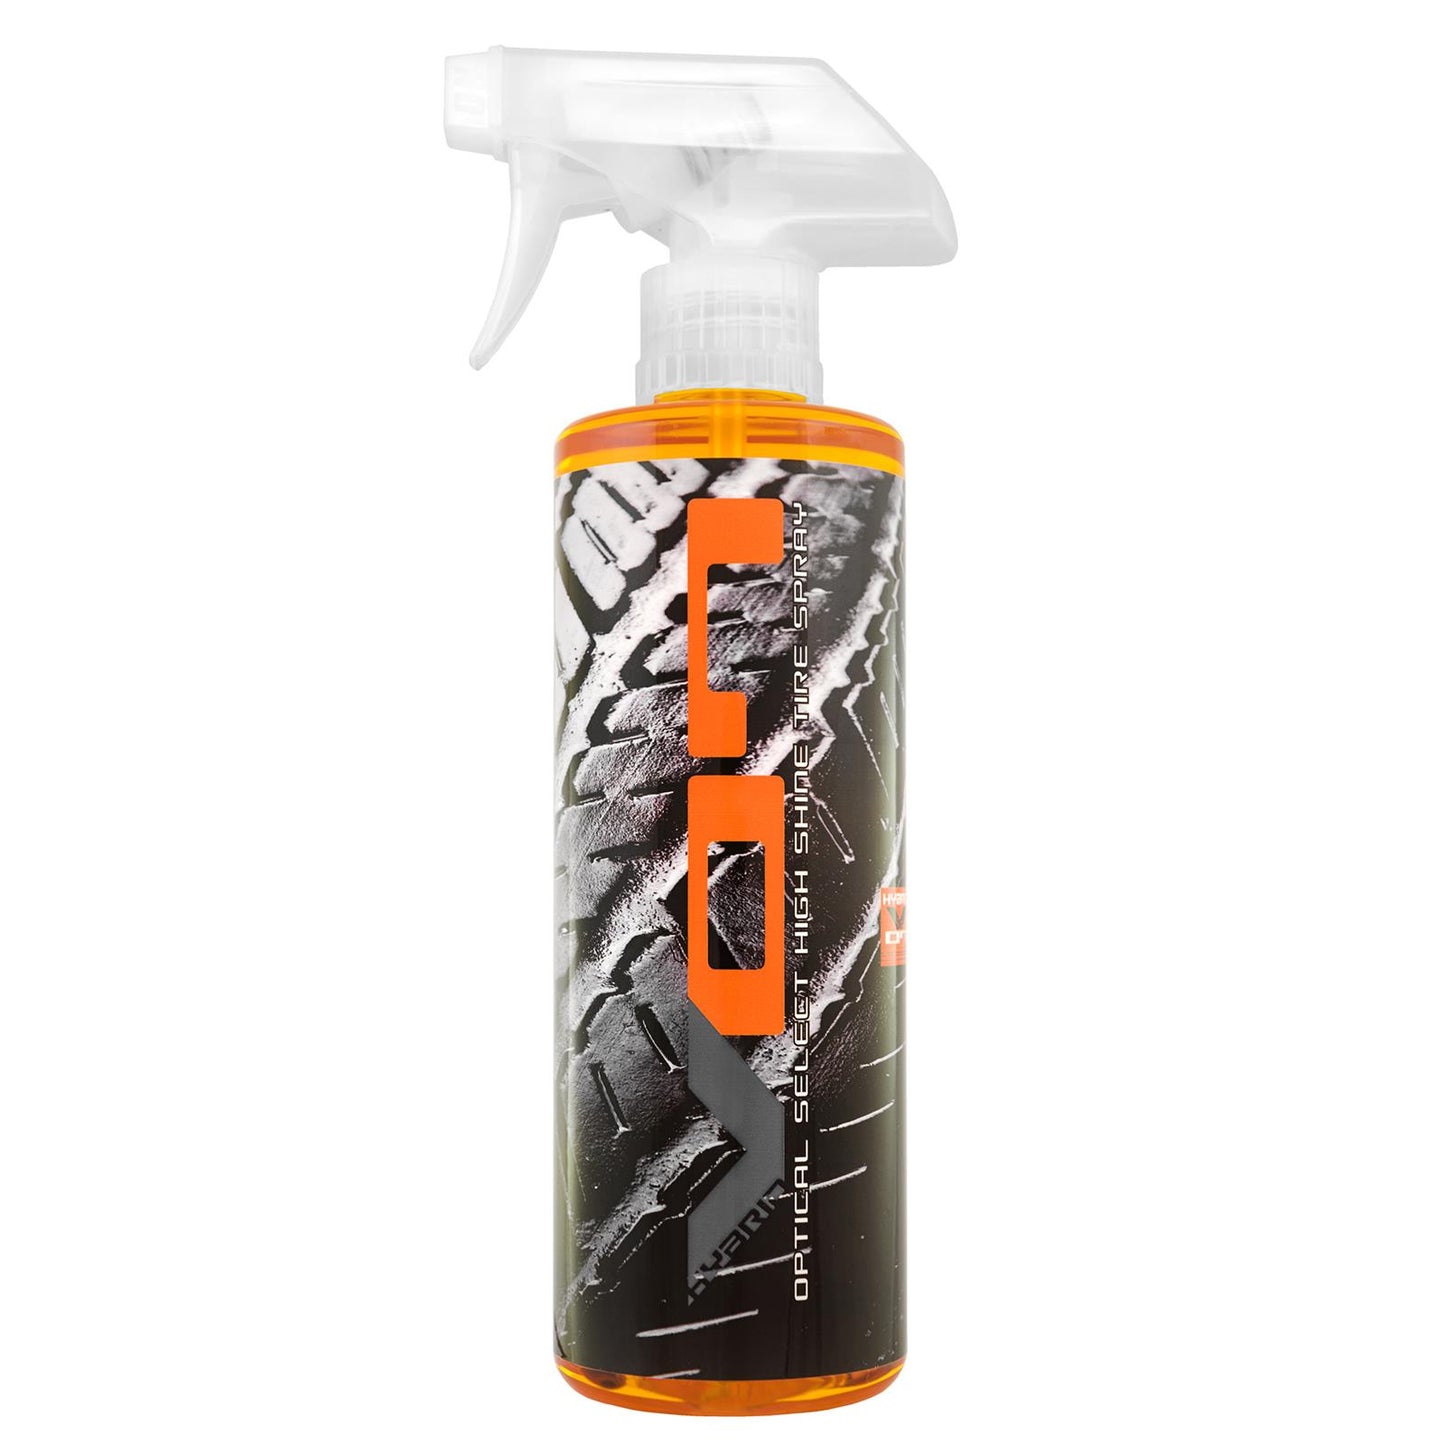 Chemical Guys Off-Road Detailing Kits